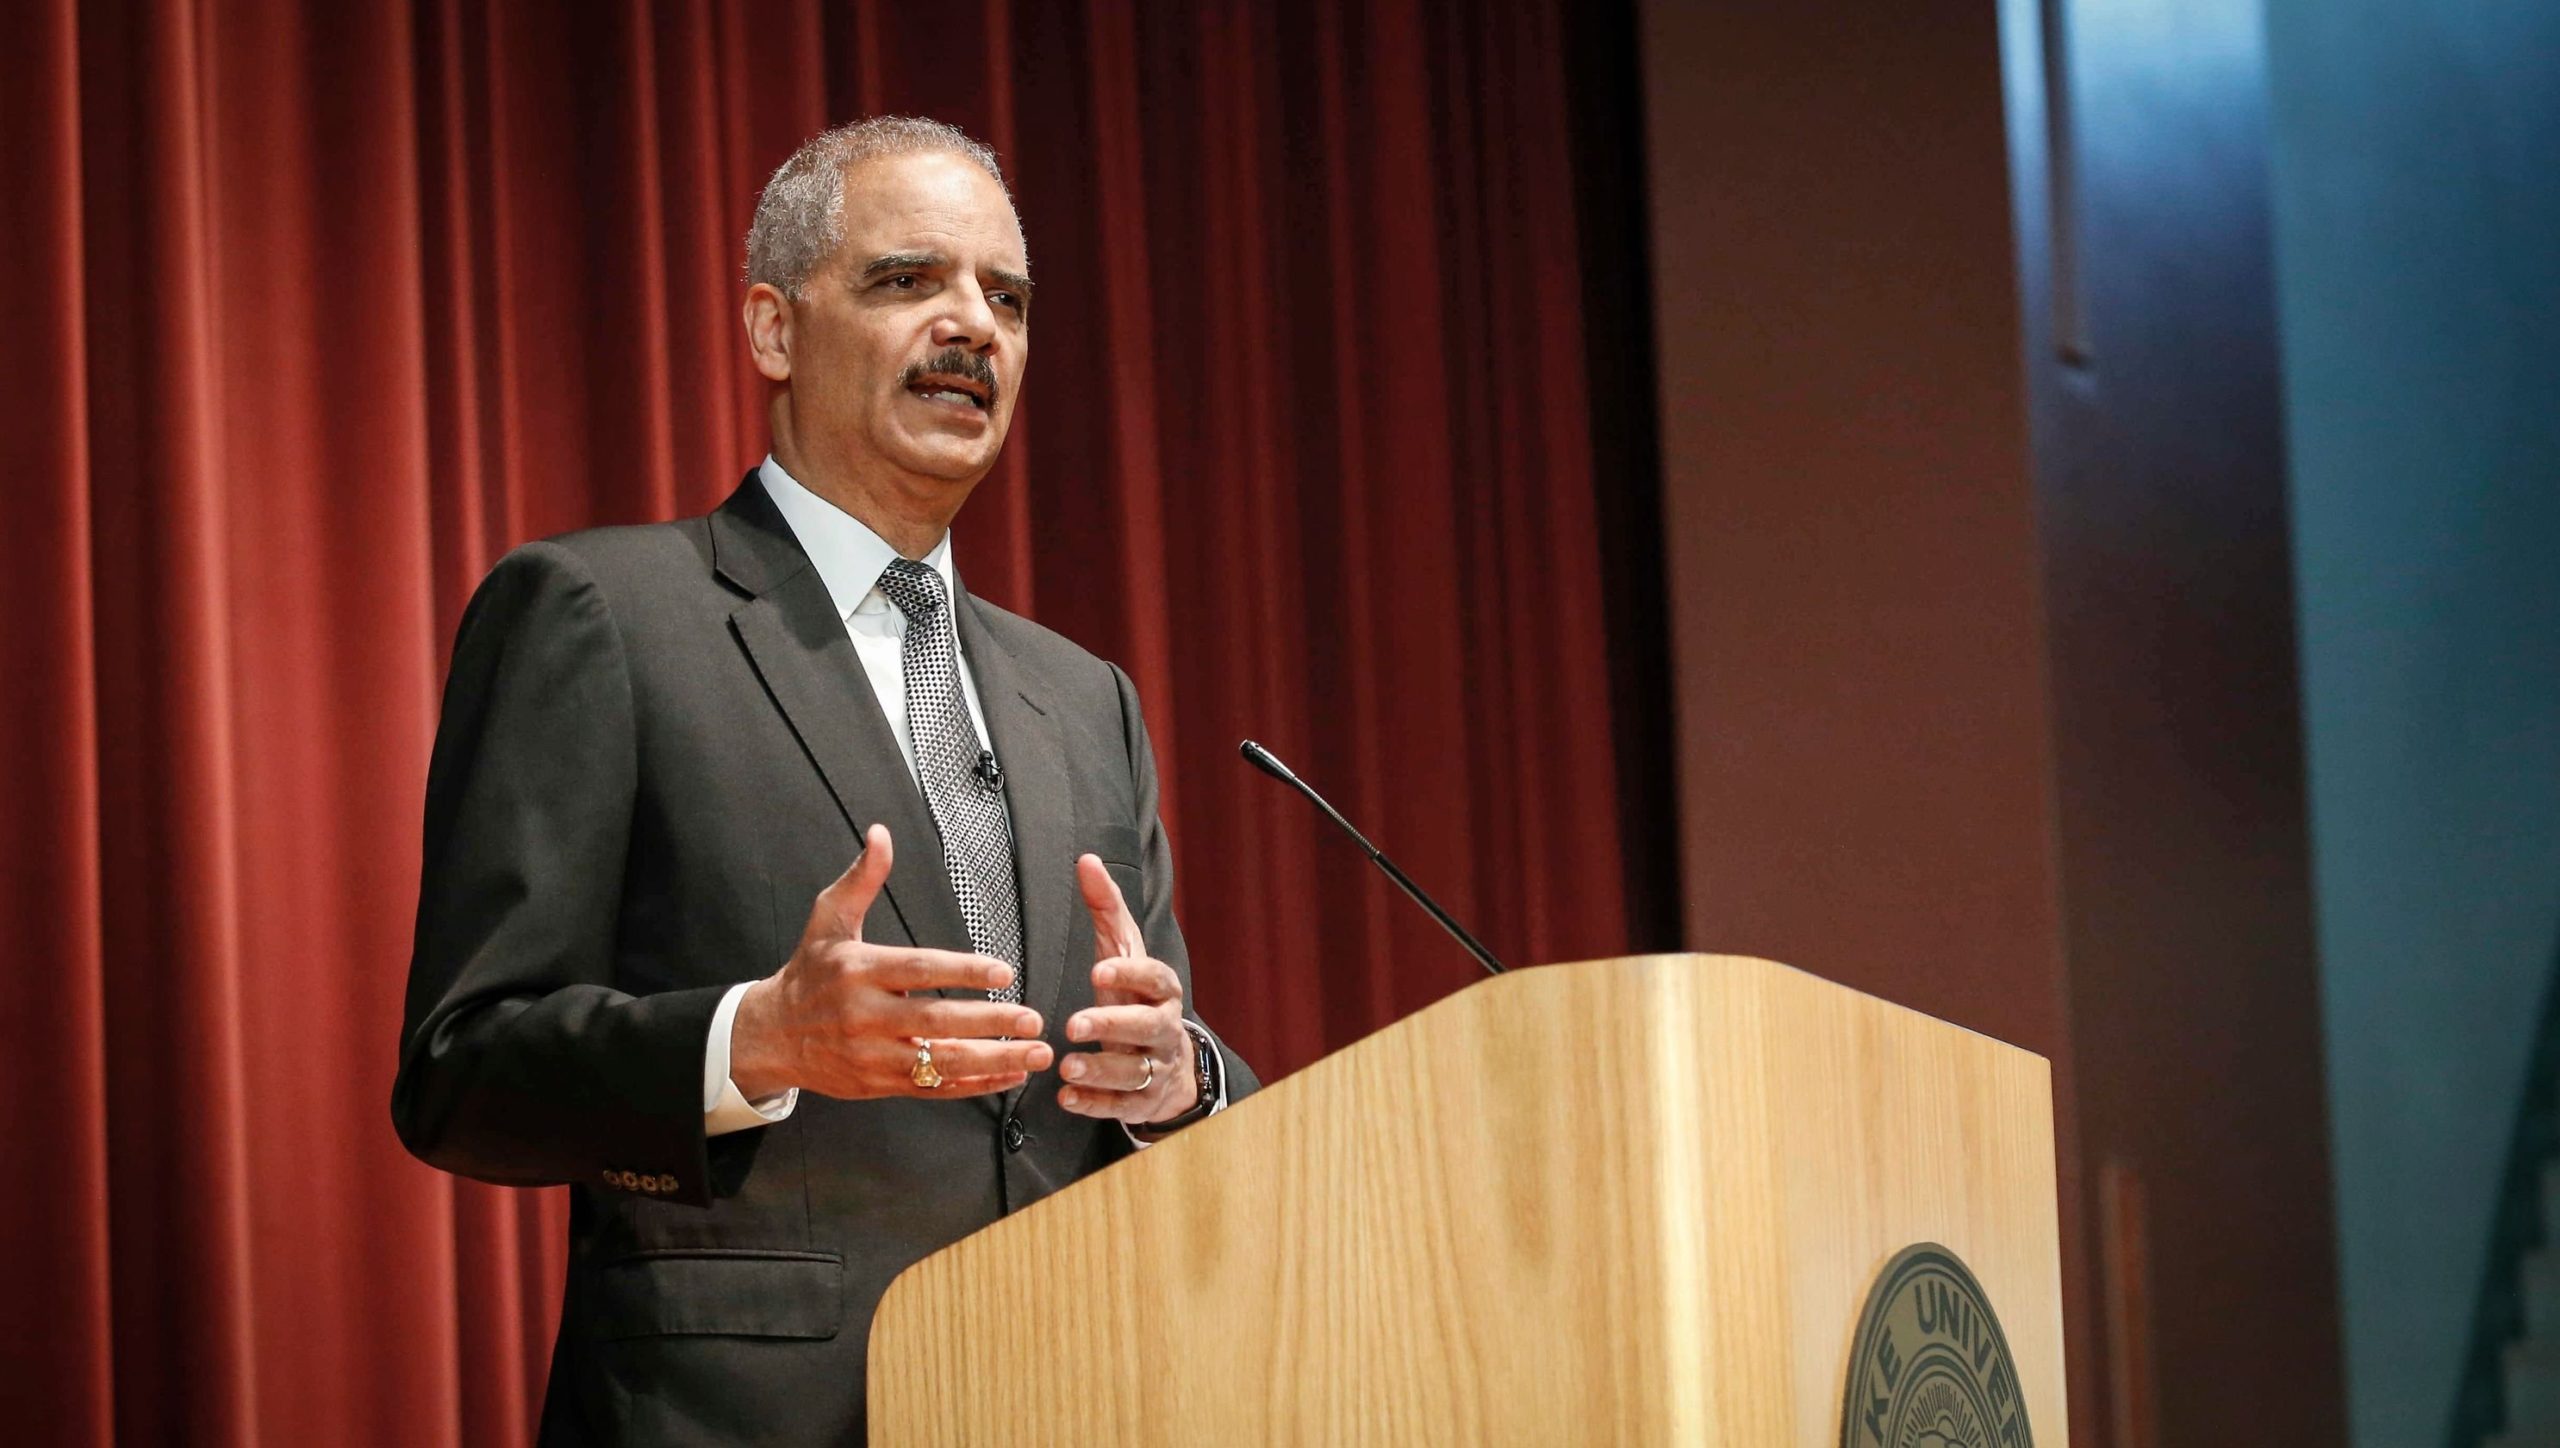 Former AG Eric Holder visits Des Moines, Iowa and told law students he would vote for marijuana legalization if he were a member of Congress. Holder also implied that he lobbied unsuccessfully internally to get the Obama administration to reschedule cannabis.